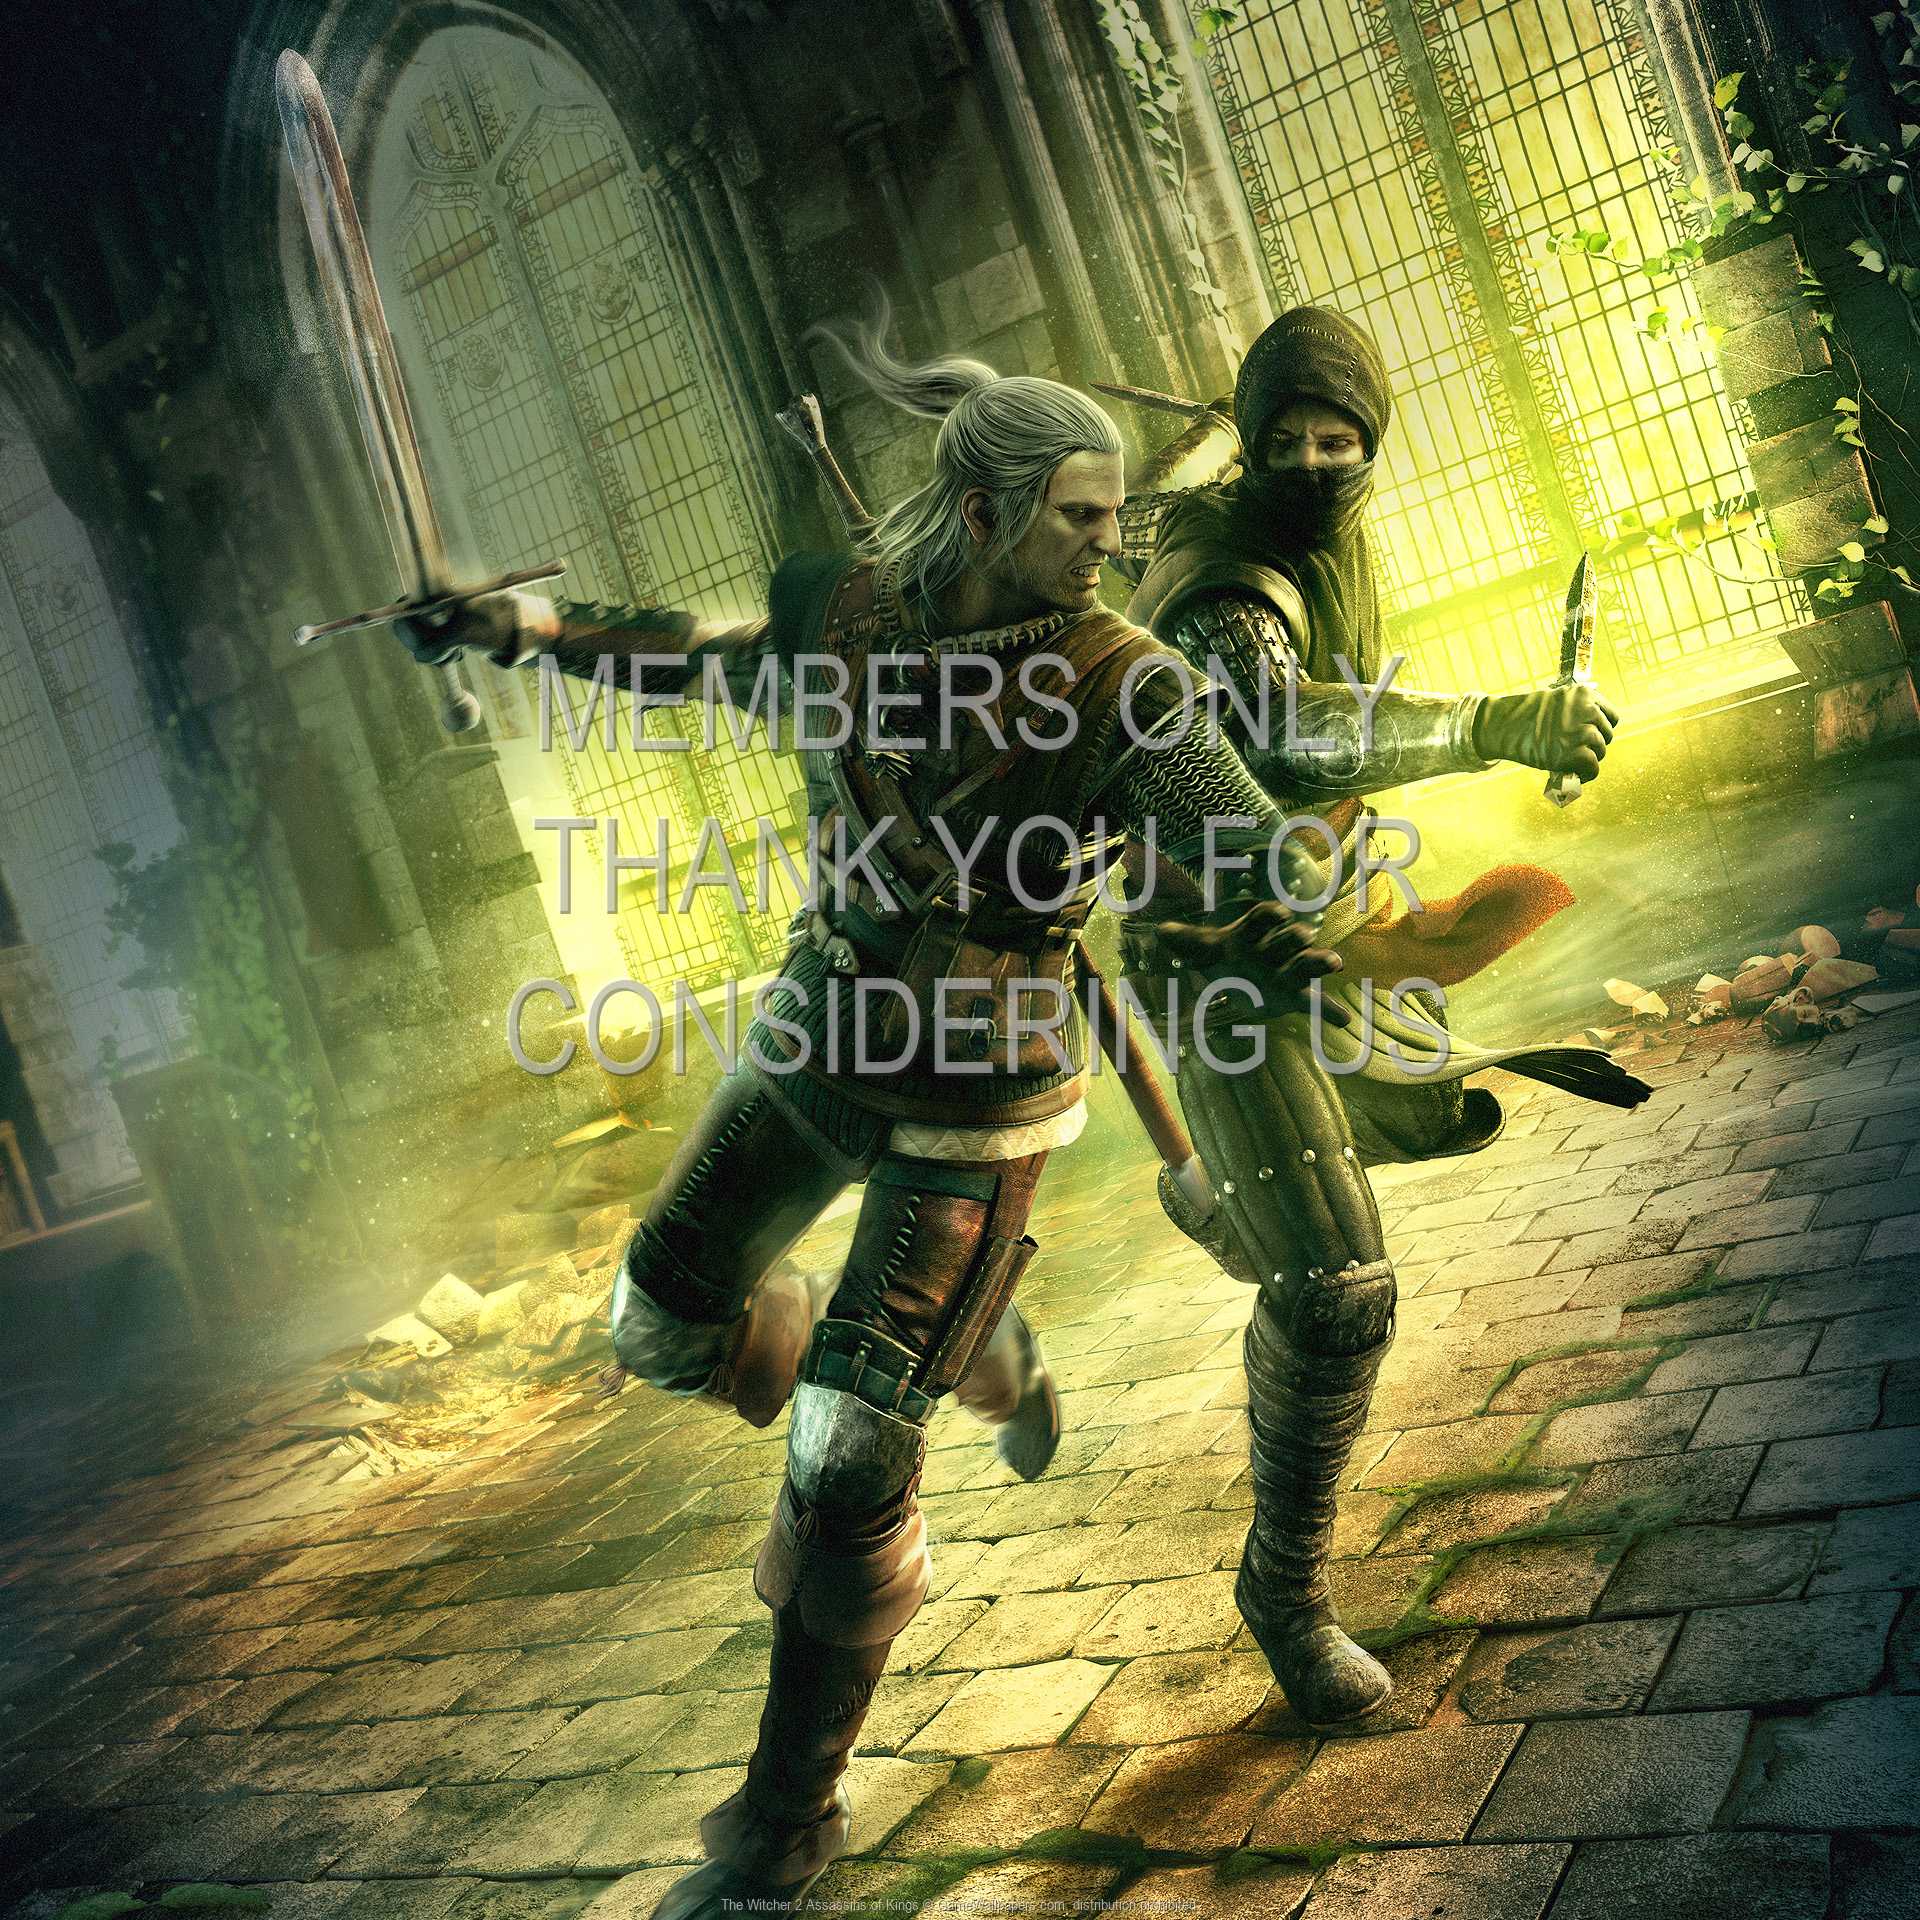 The Witcher 2: Assassins of Kings 1080p Horizontal Mobile fond d'cran 02